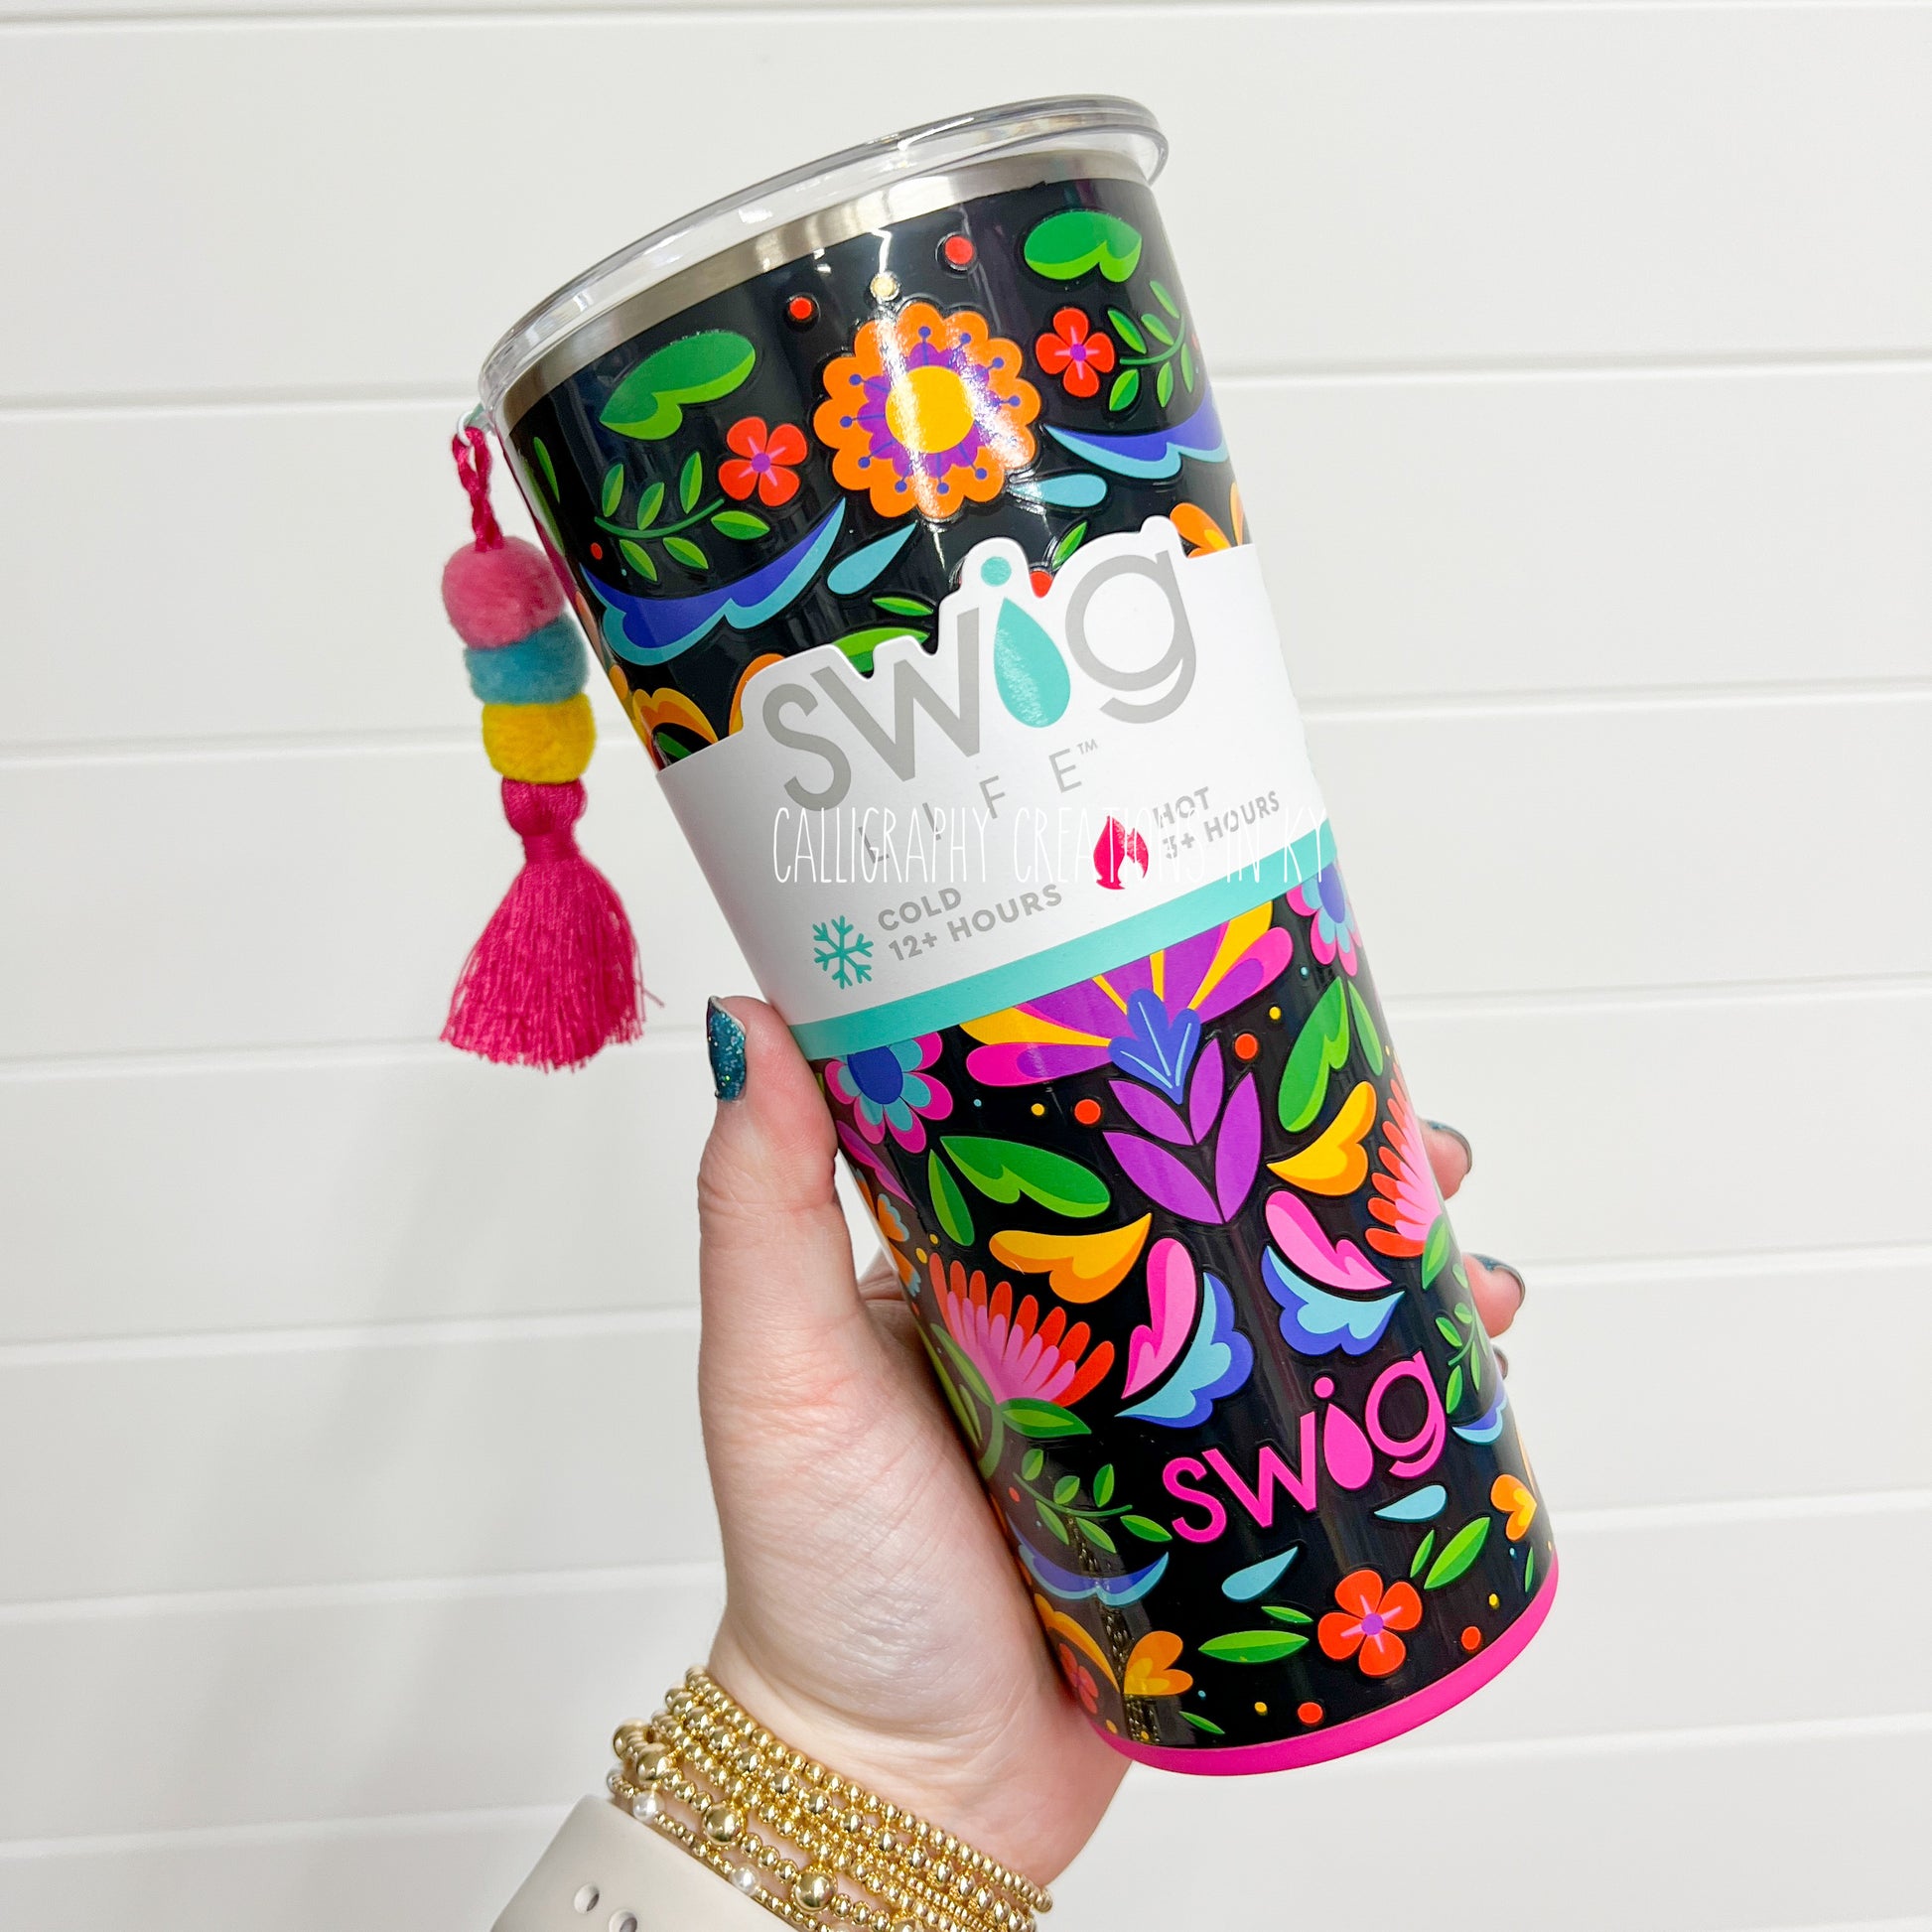 Caliente 22 oz Swig Tumbler – Calligraphy Creations In KY